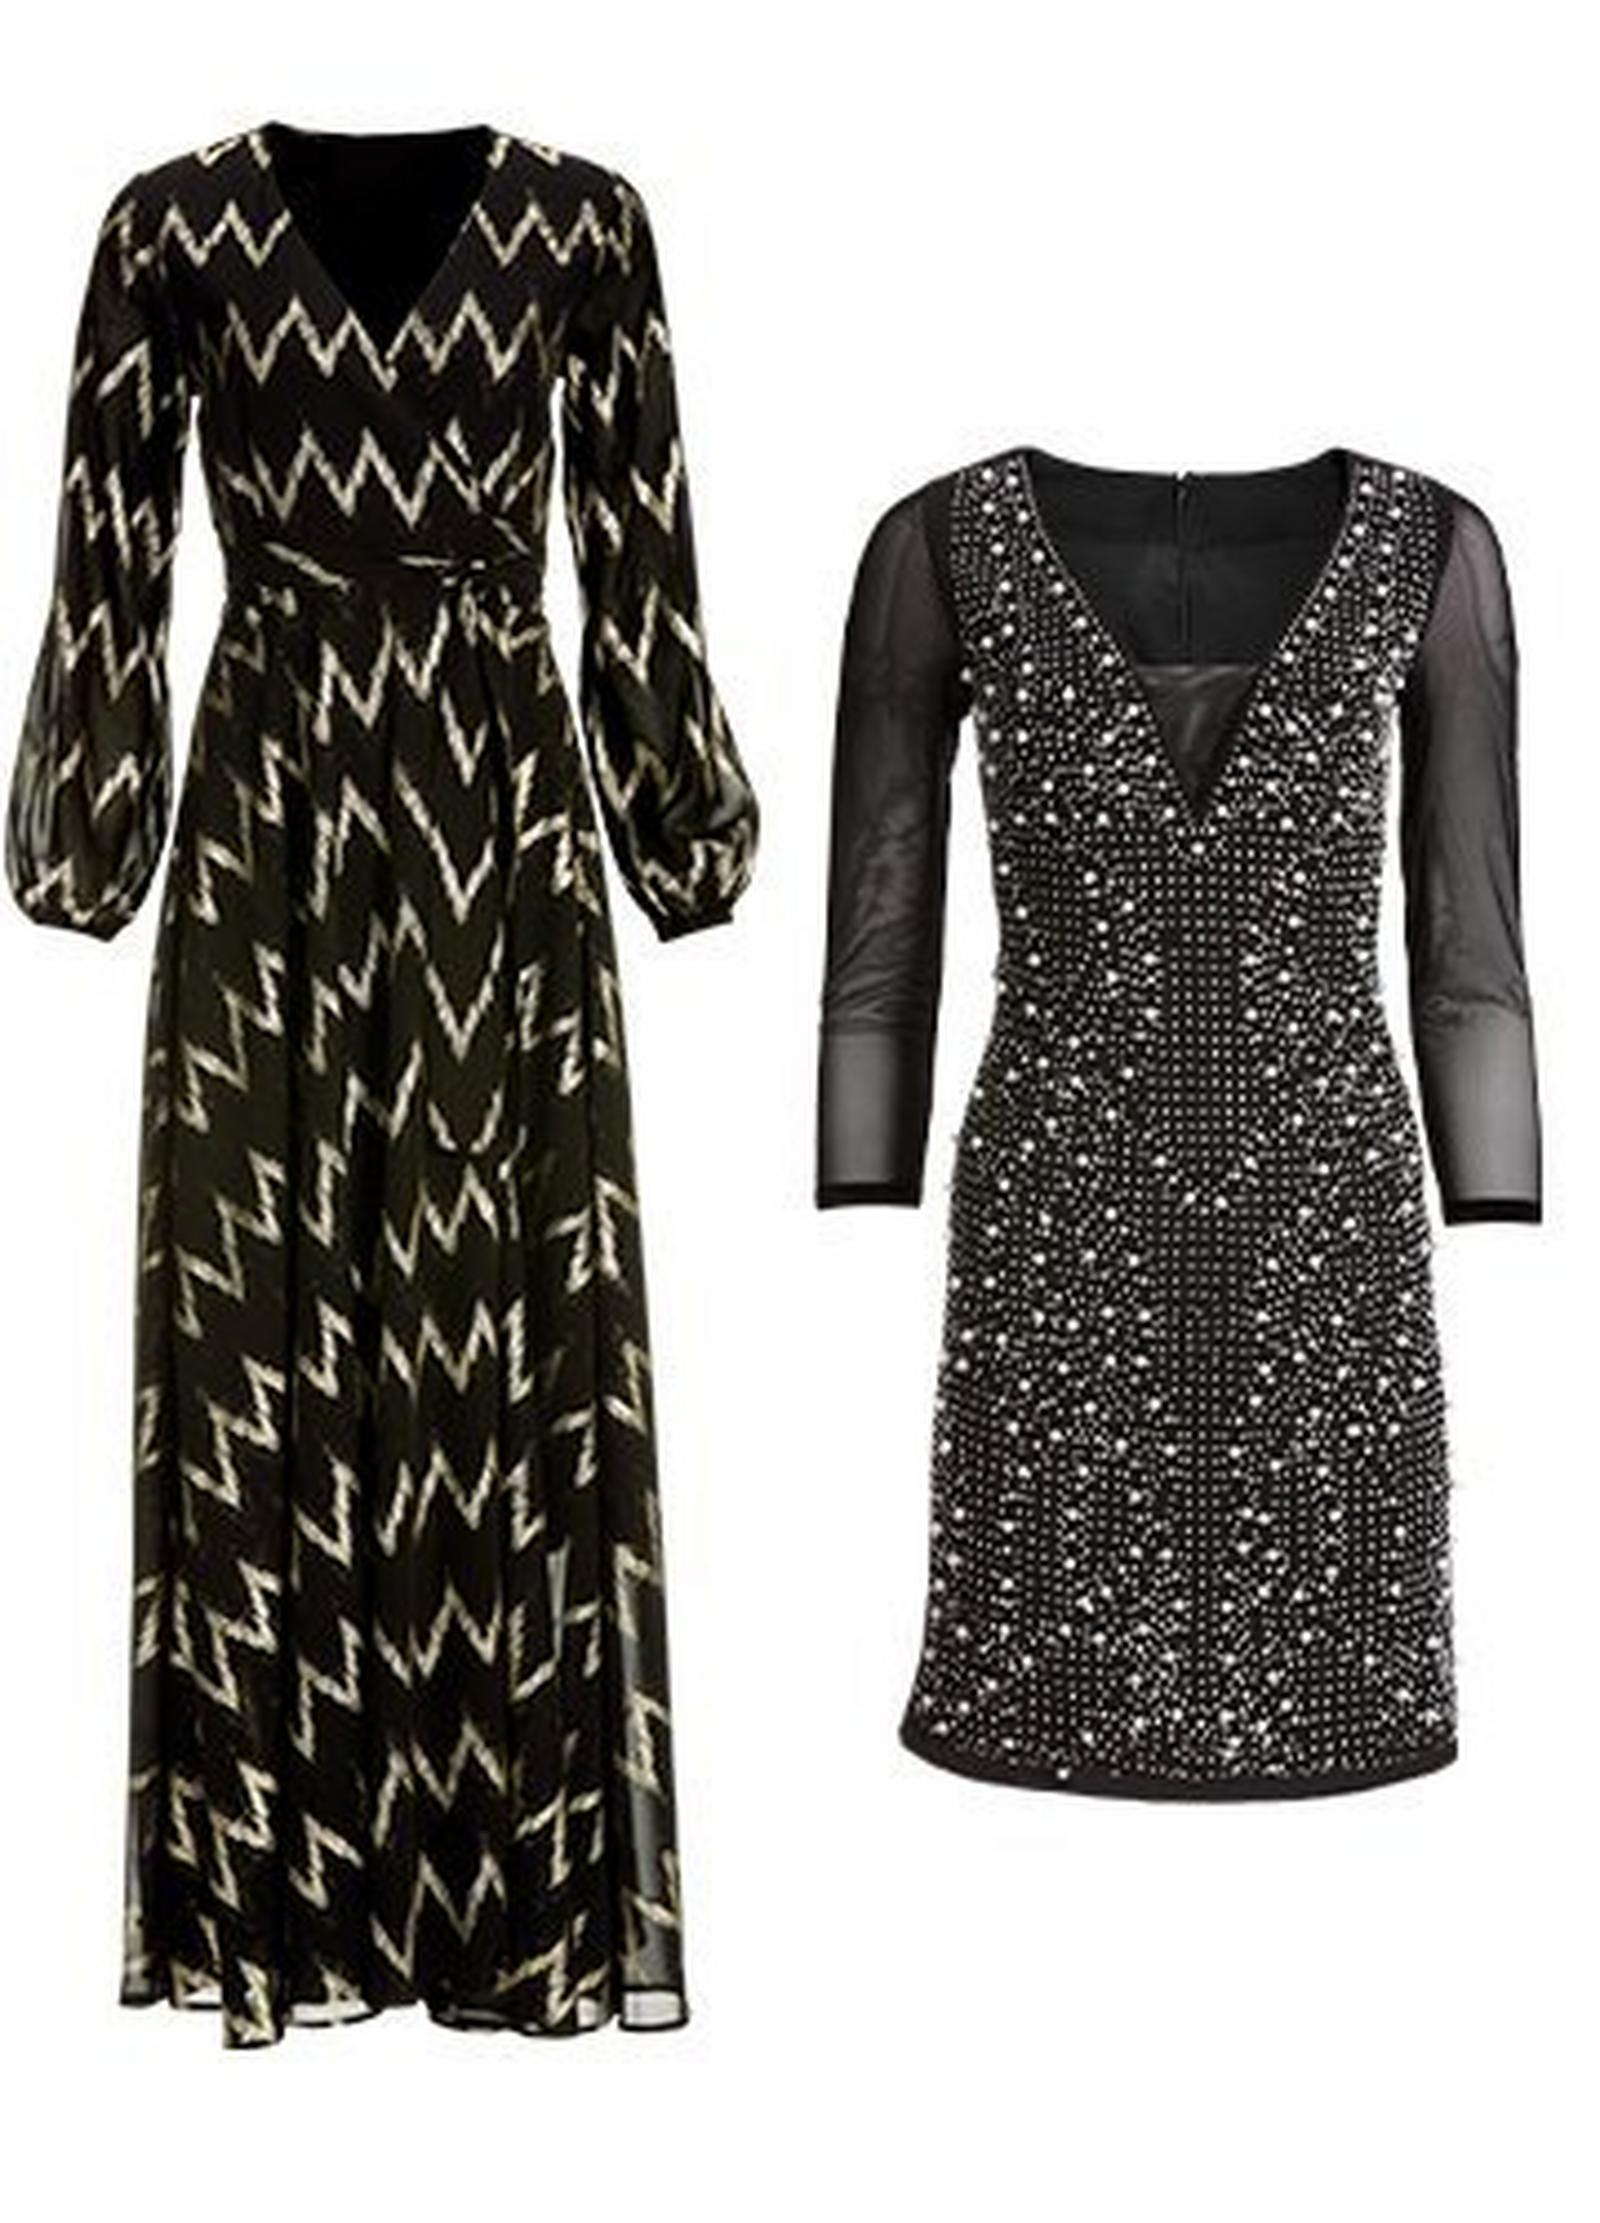 black long-sleeve wrap dress with a gold chevron print and a black illusion sleeve pearl embellished dress.